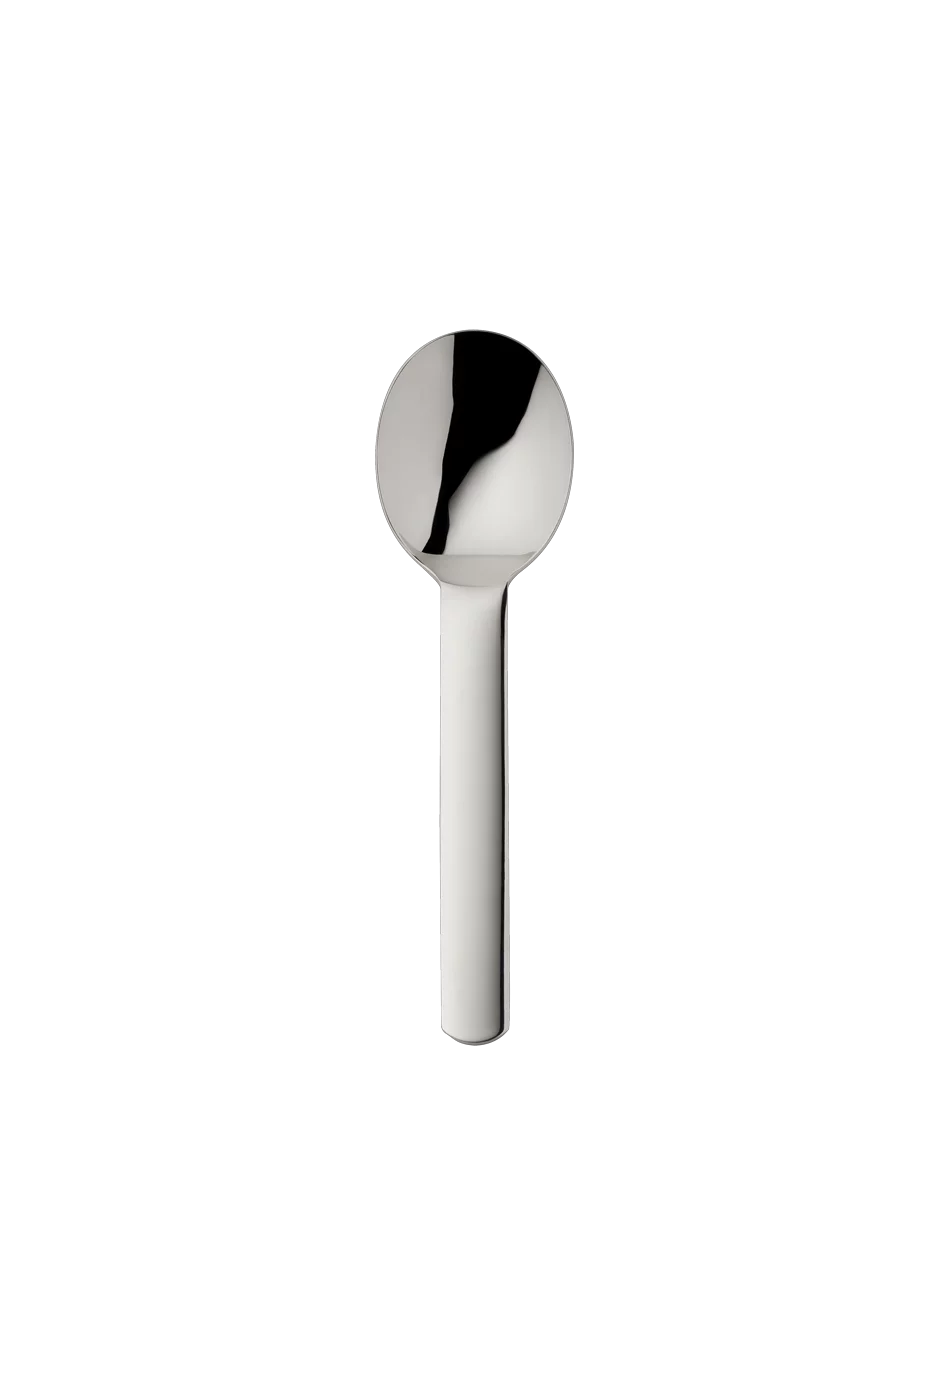 Topos Cream Spoon (Broth Spoon) (18/8 stainless steel)